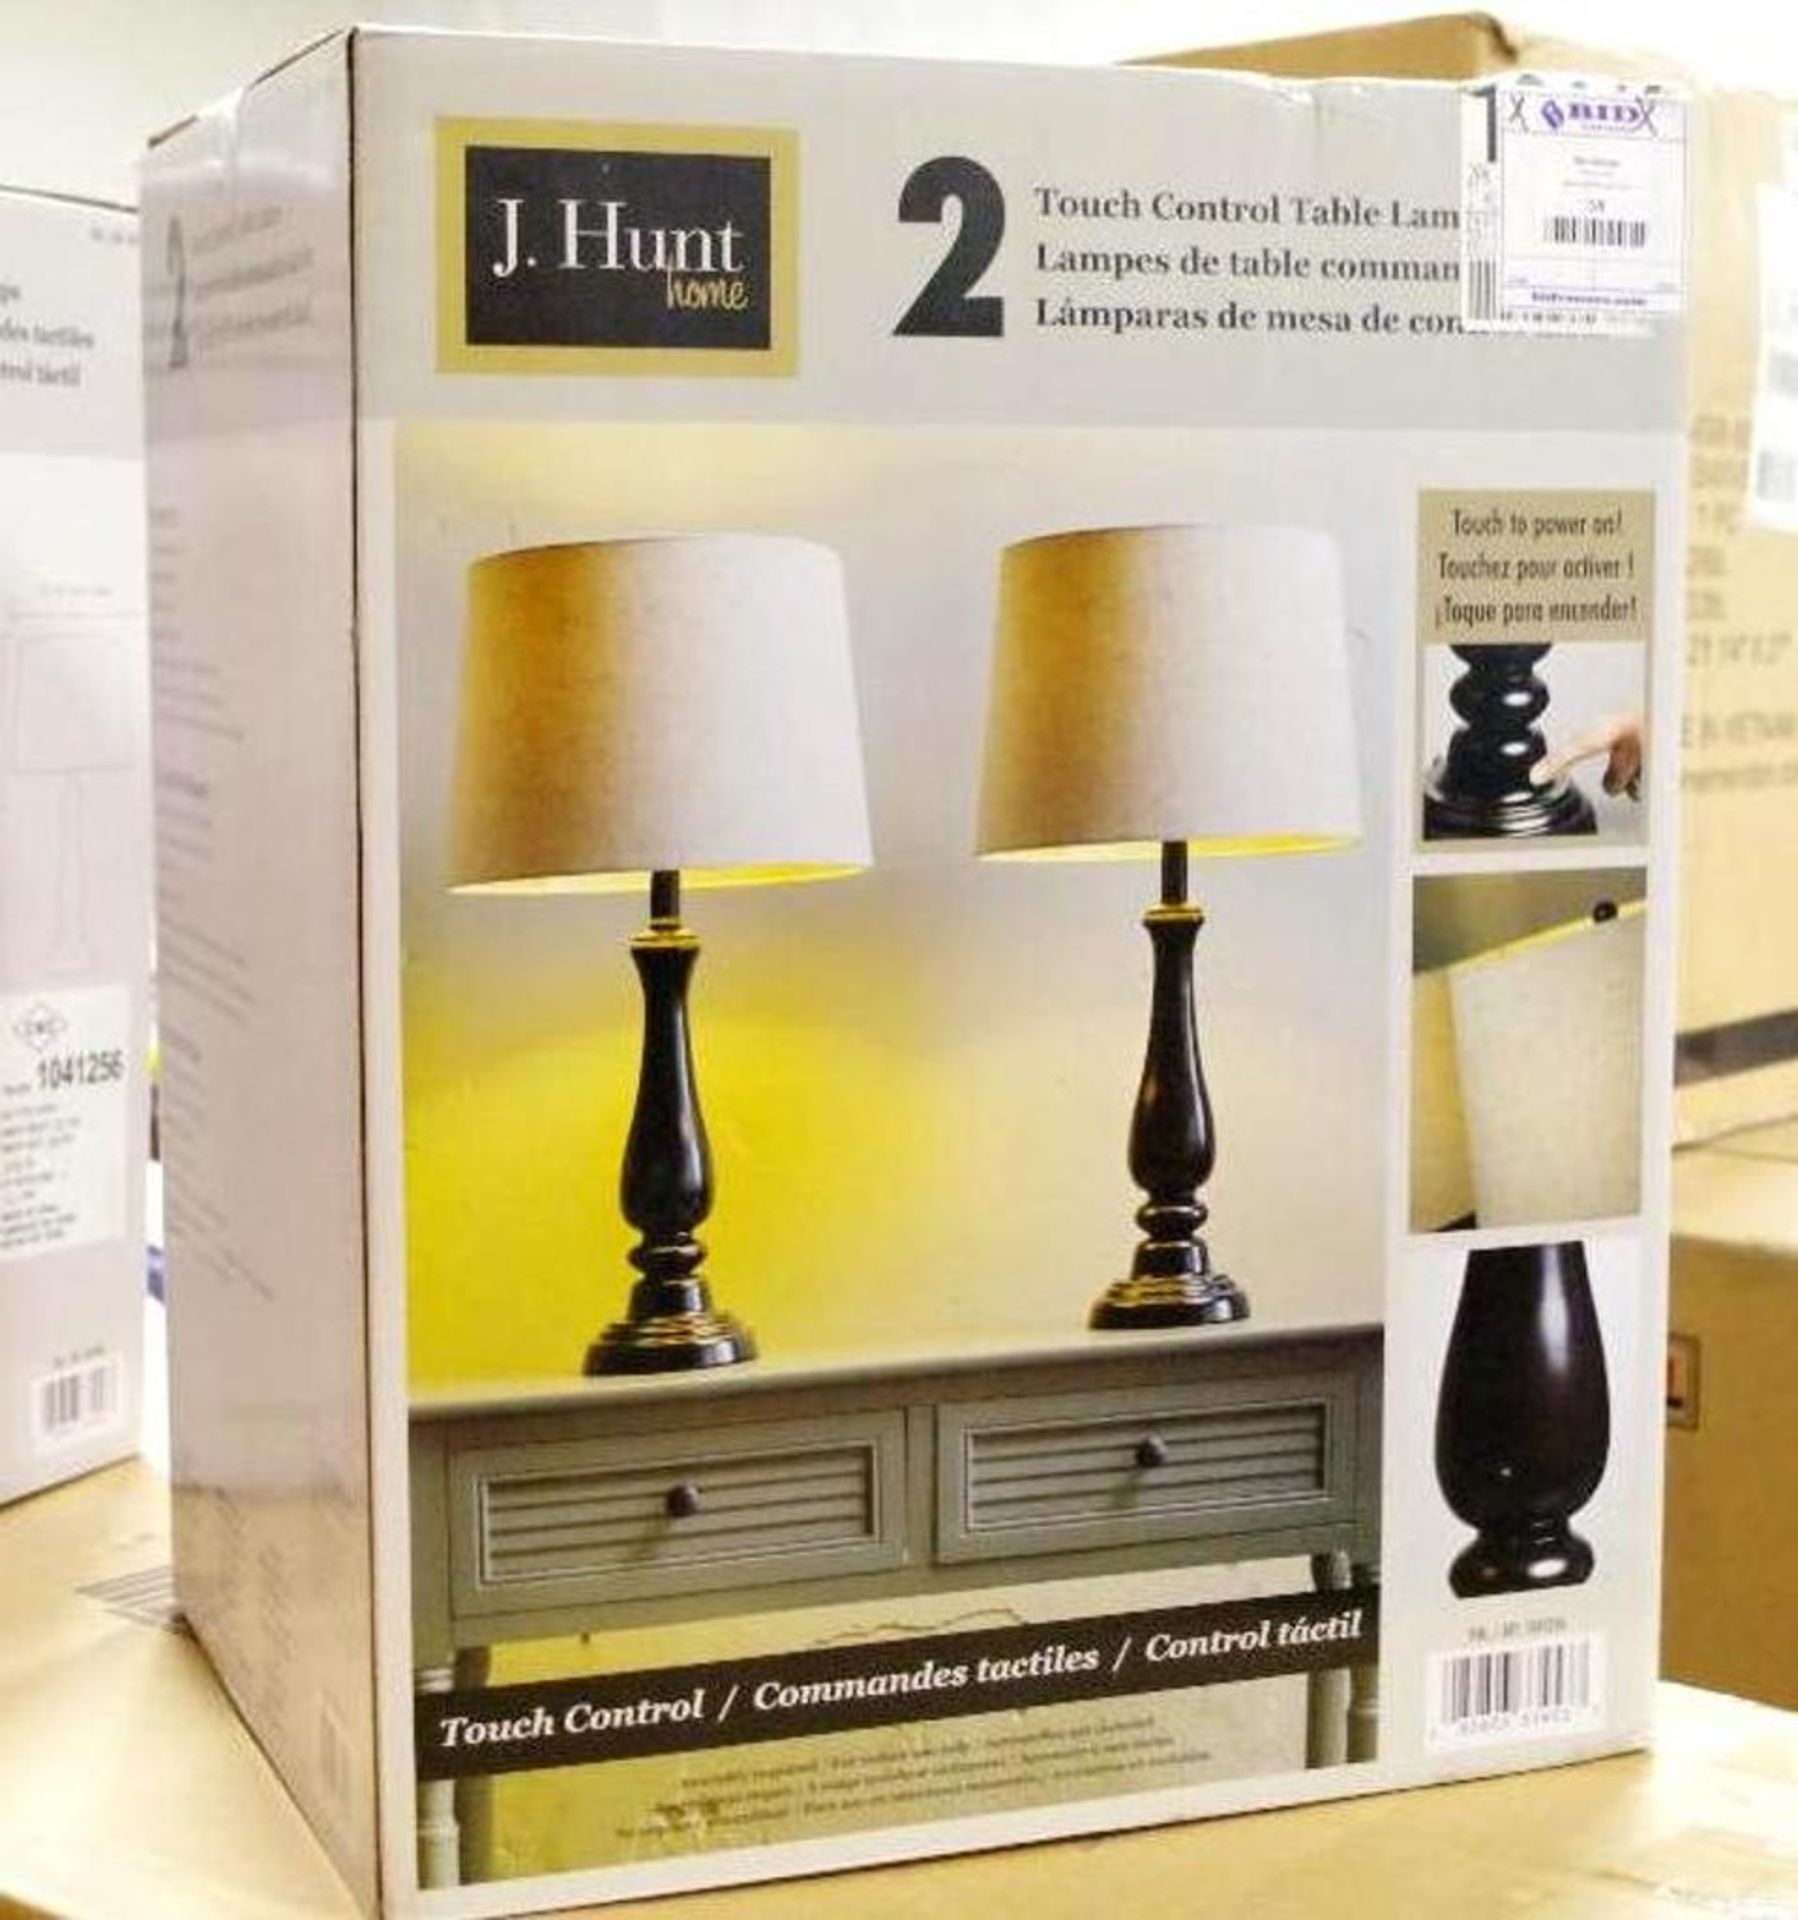 NEW J. HUNT Touch Control Table Lamps (Box Contains 2 Lamps)